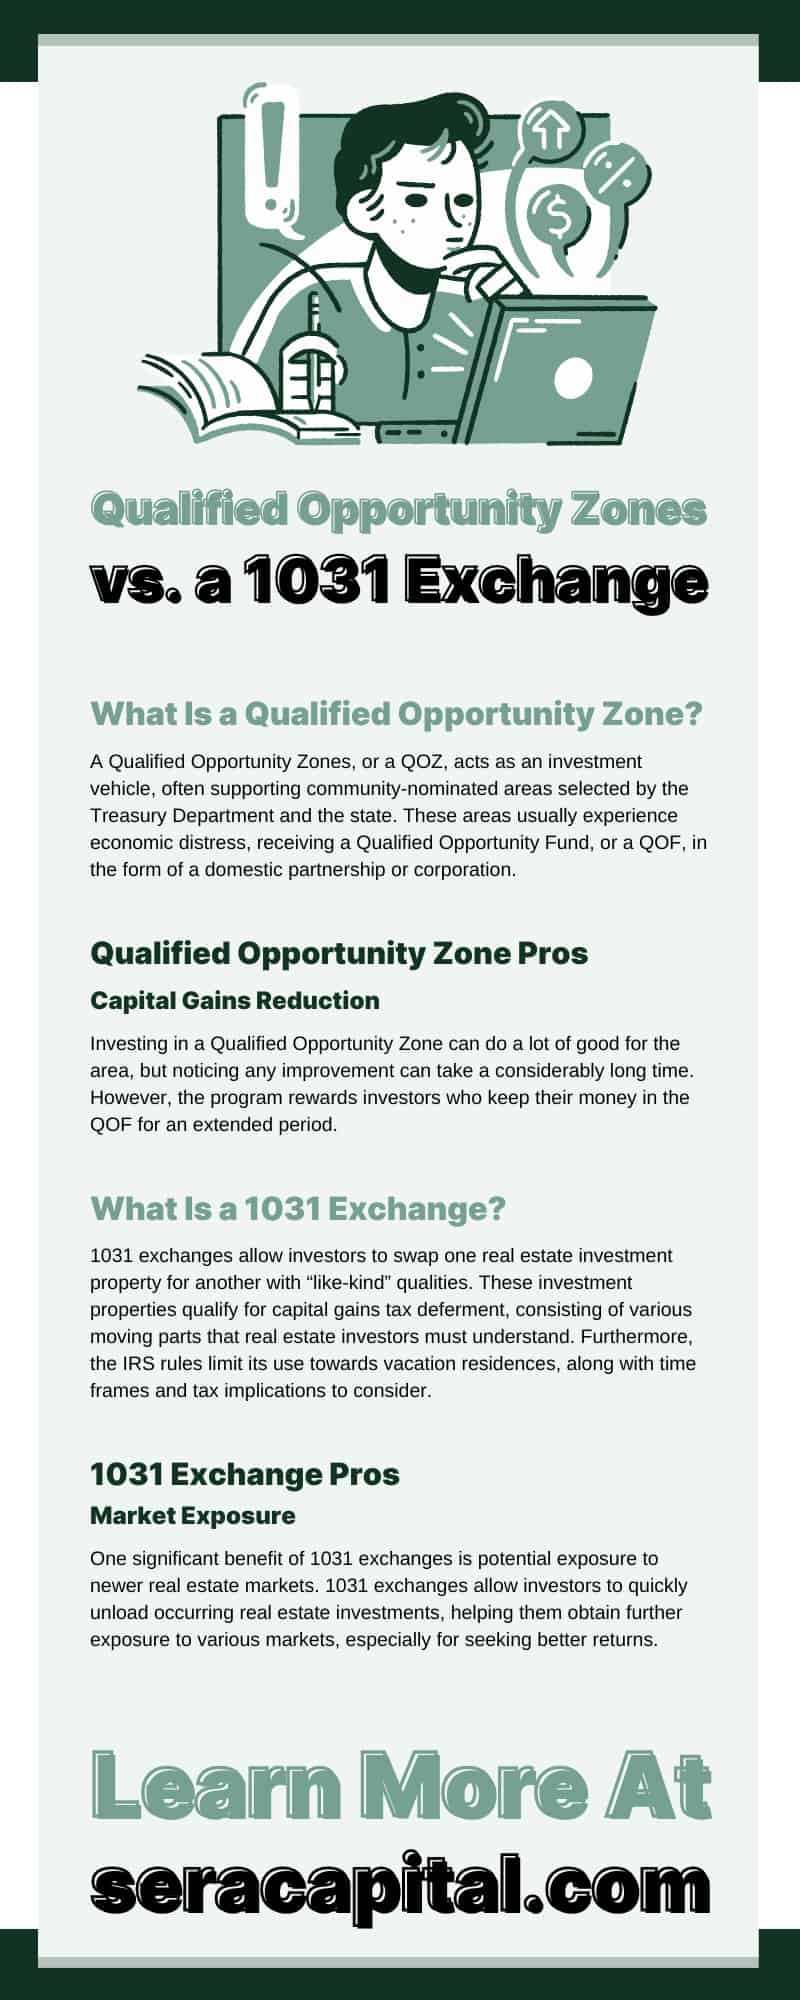 Qualified Opportunity Zones vs. a 1031 Exchange